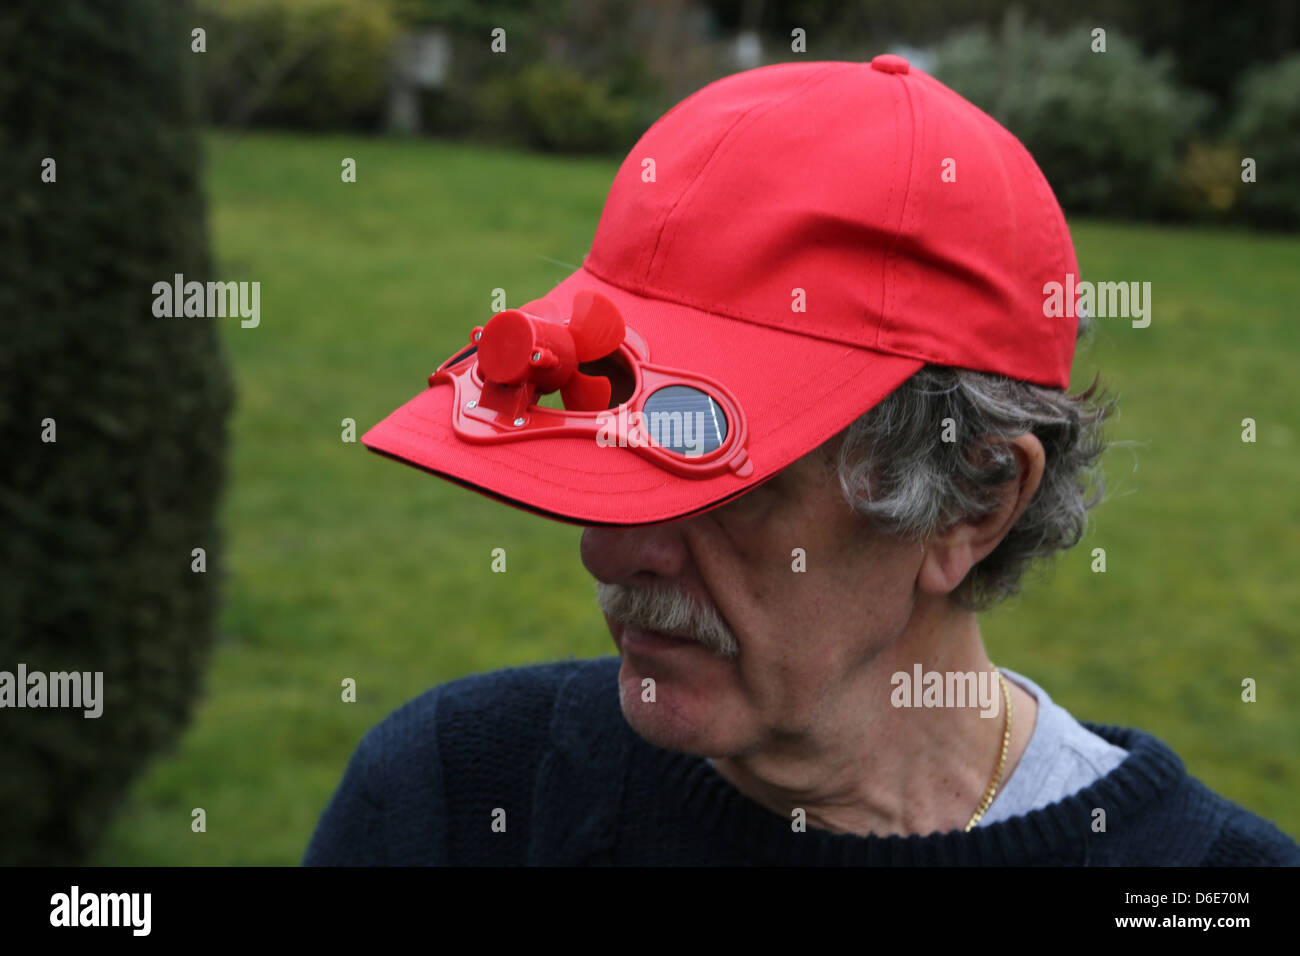 Man Wearing Red Baseball Cap With Solar Powered Fan Stock Photo